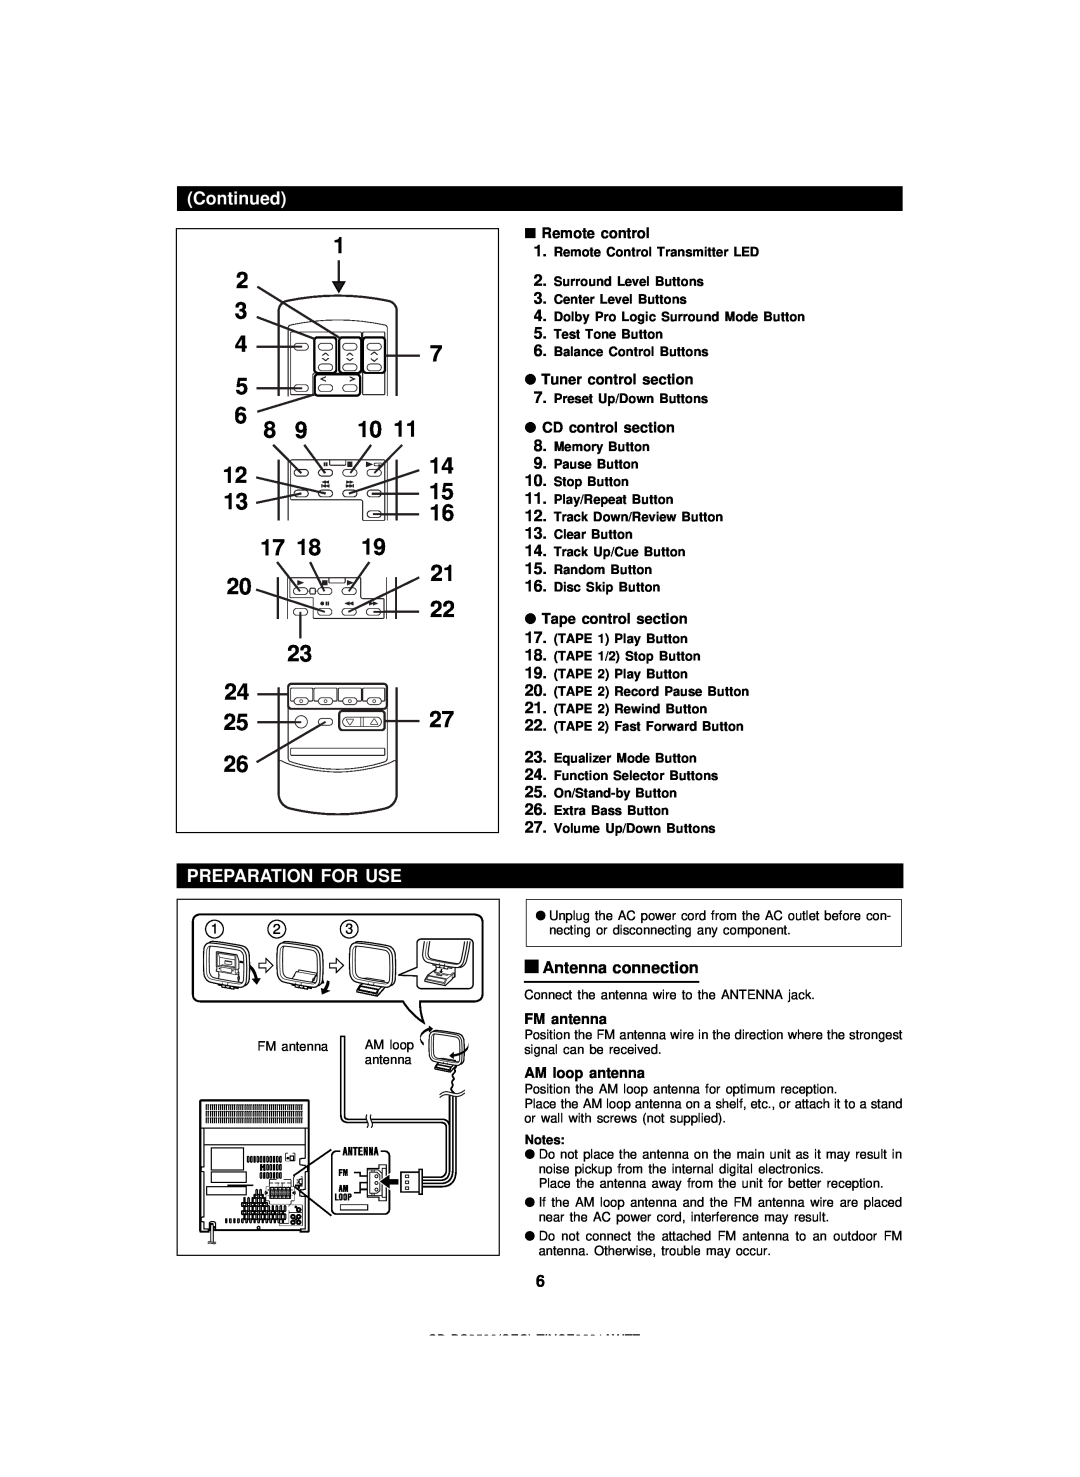 Sharp CDPC3500 operation manual Preparation For Use, Continued, Antenna connection 